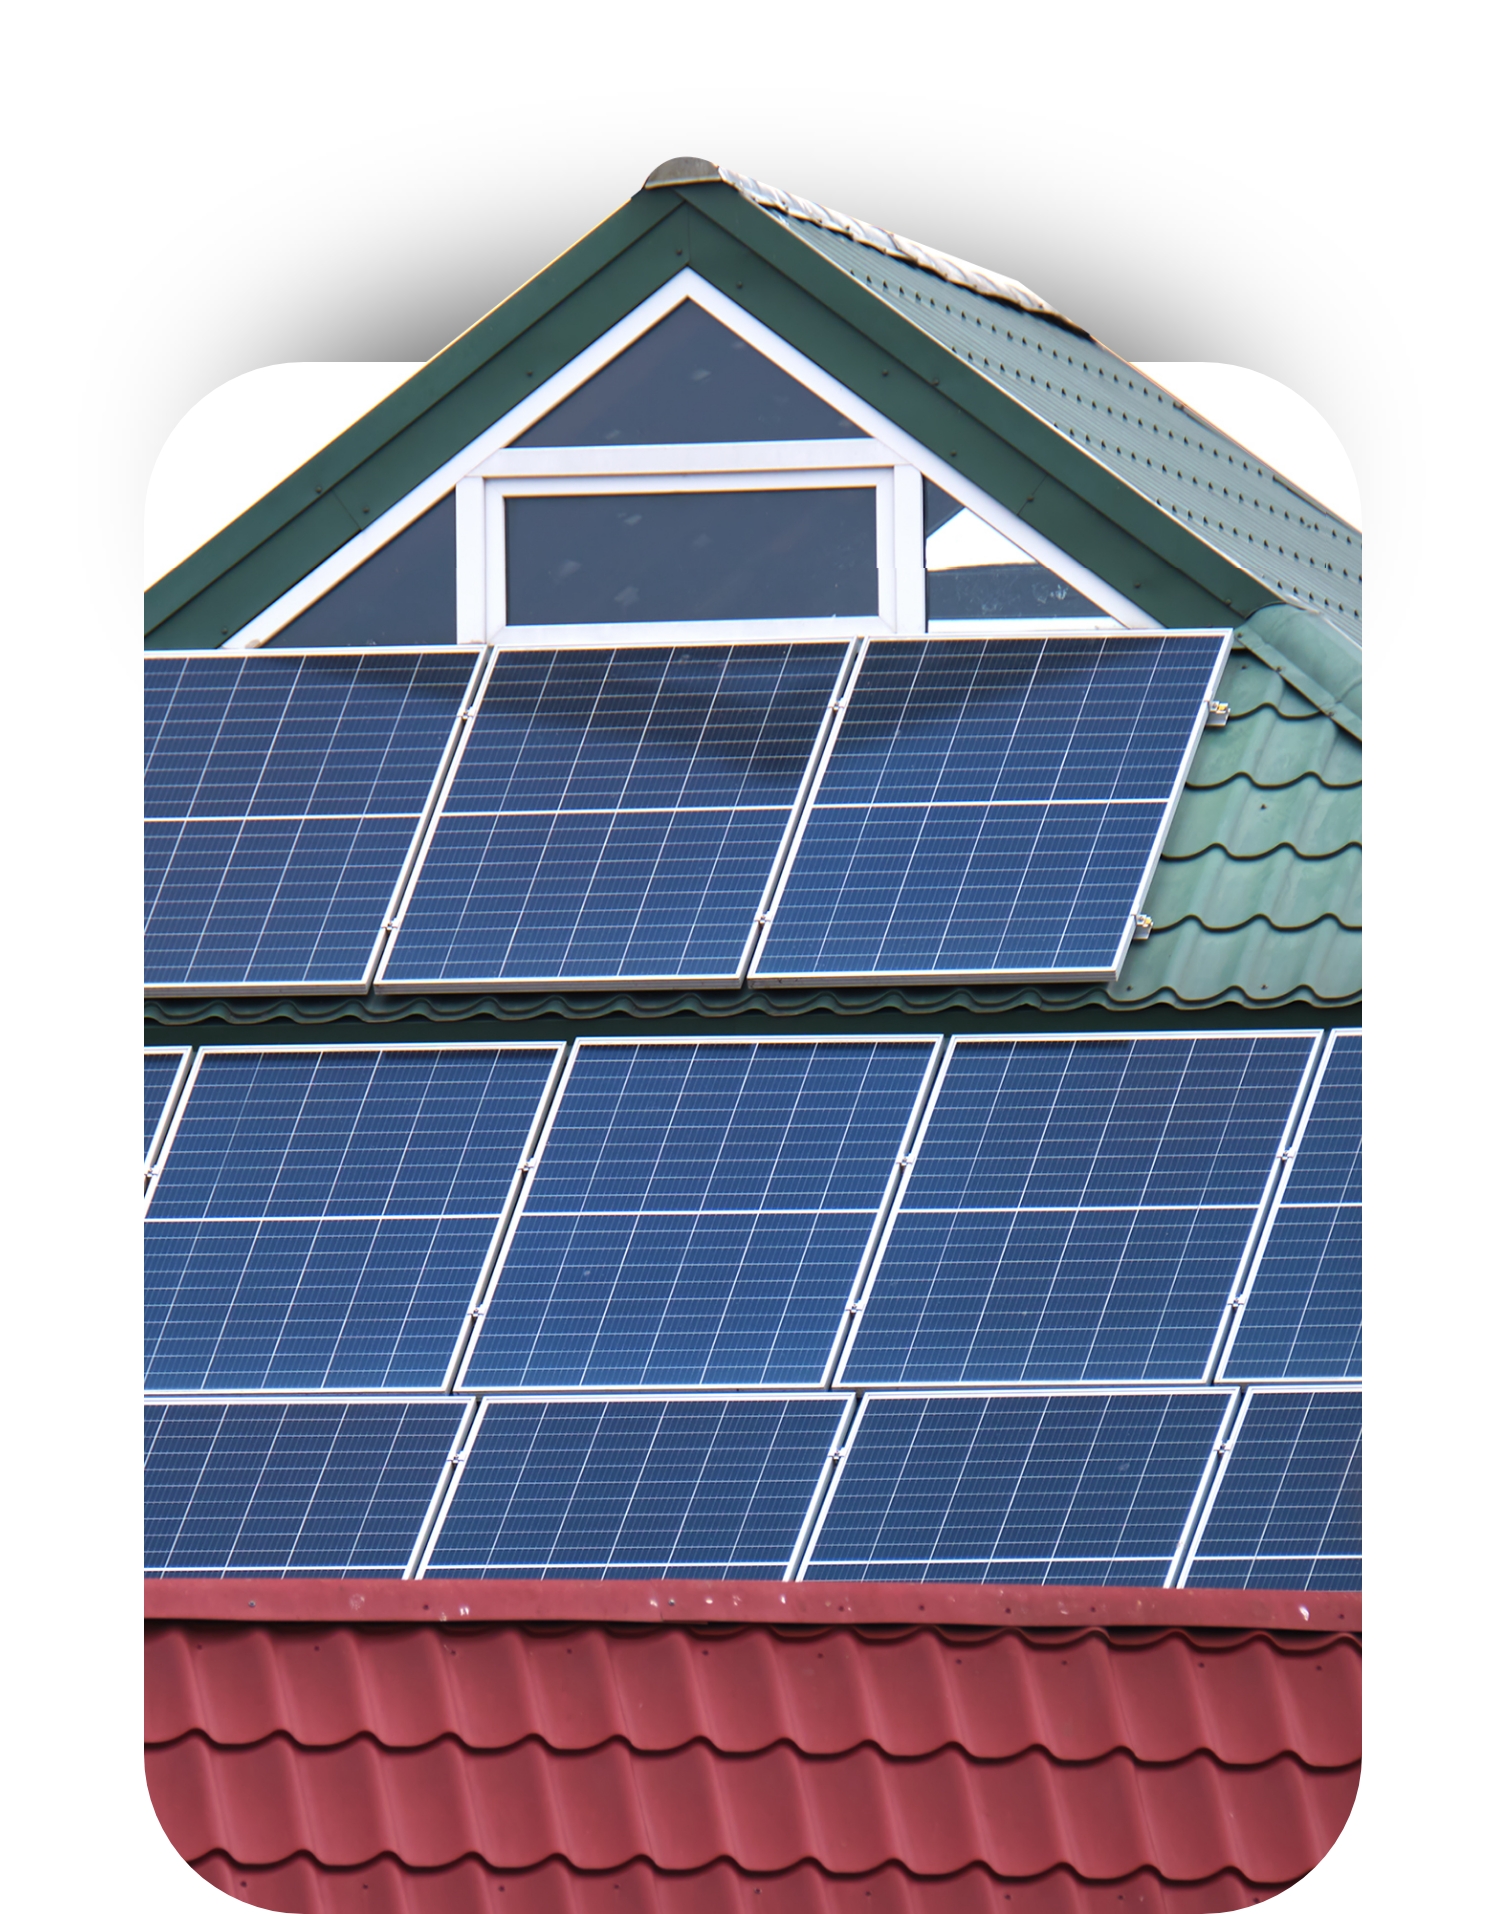 Solar panels increase home efficiency making solar panels worth the investment.